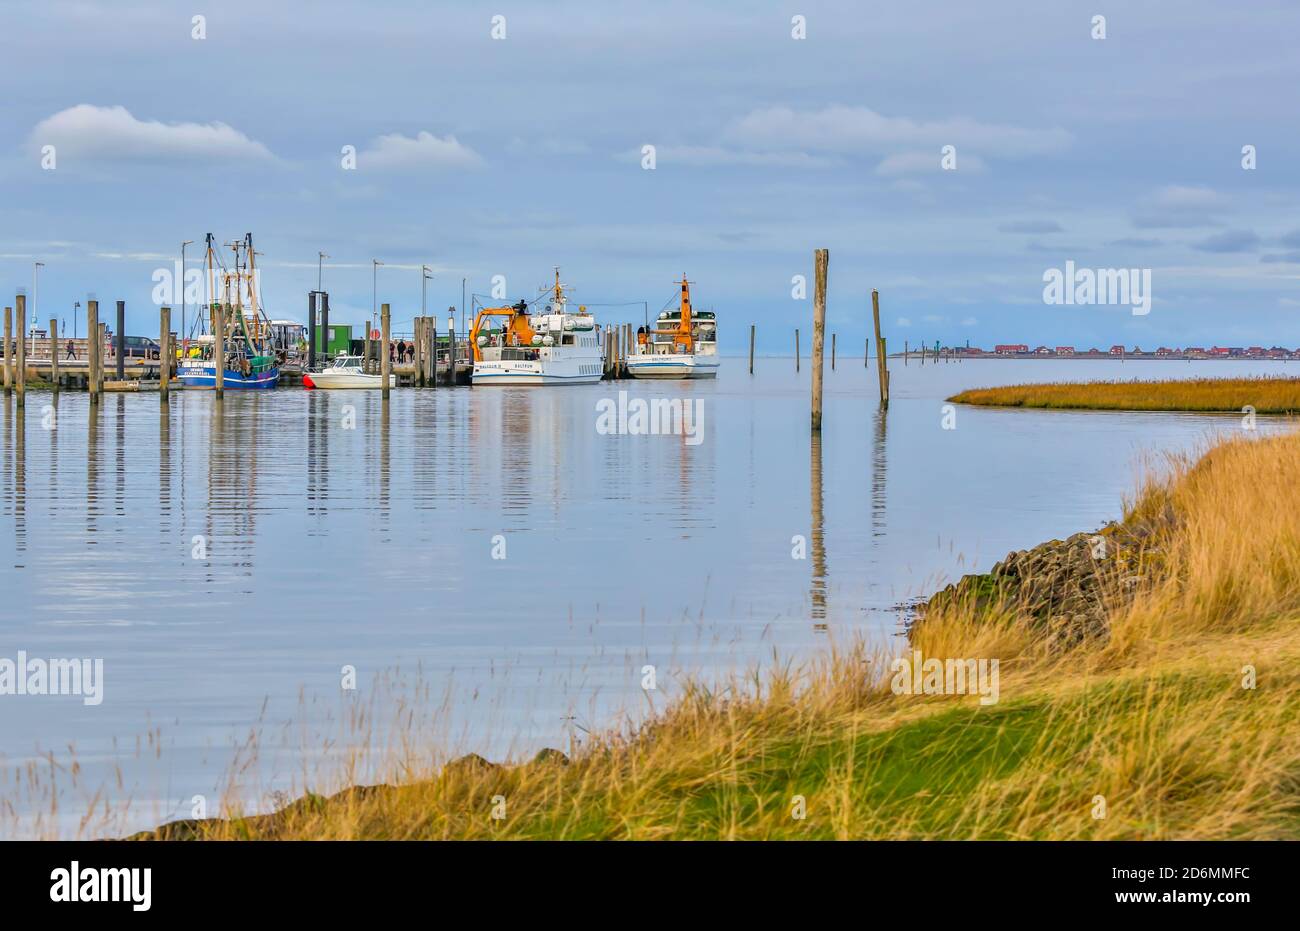 Neßmersiel is located directly on the North Sea in East Friesland. The ferries in small ferry ports bring passengers to the island of Baltrum. Stock Photo